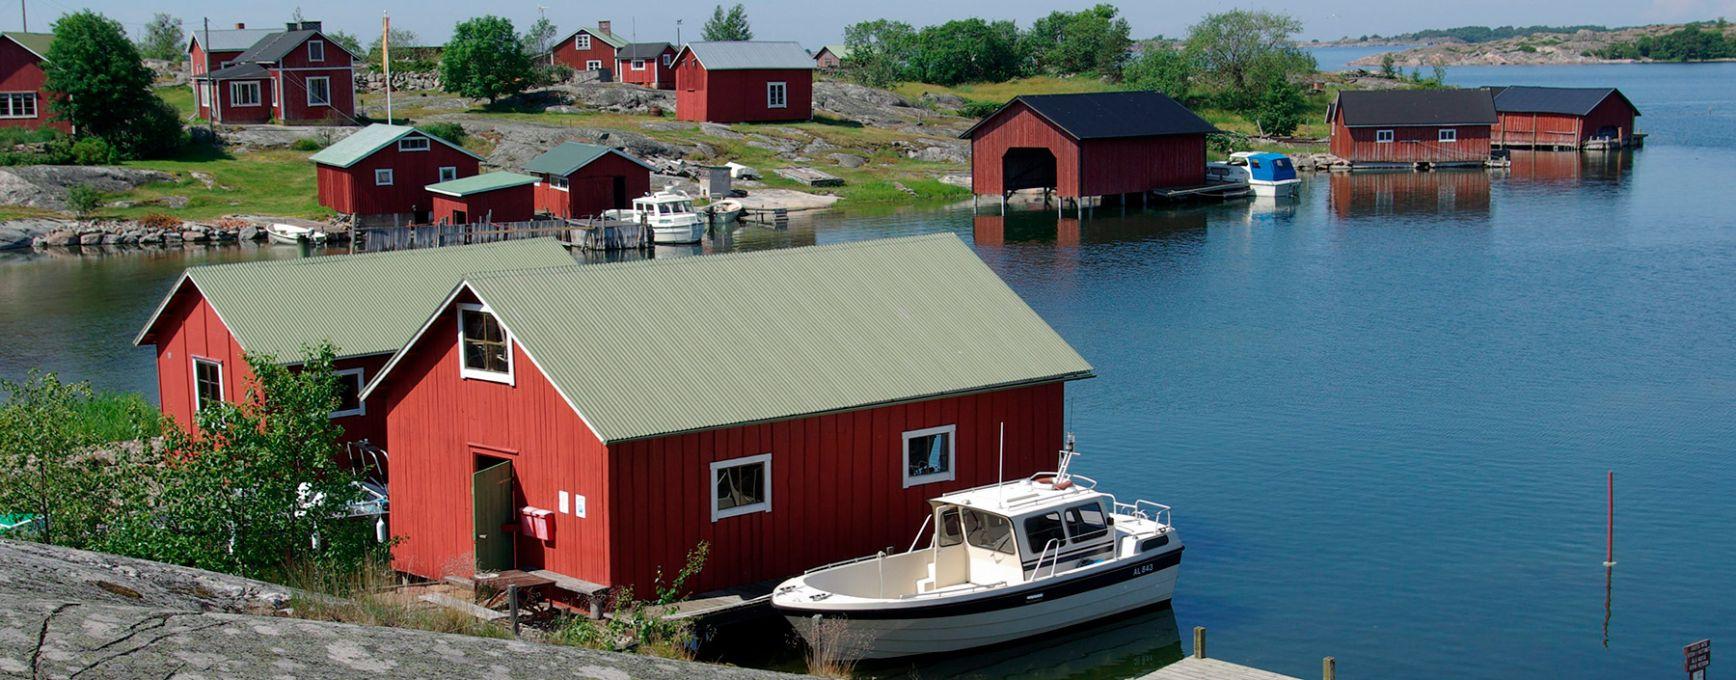 Red boathouses line the shore on an island in the Outer Archipelago.